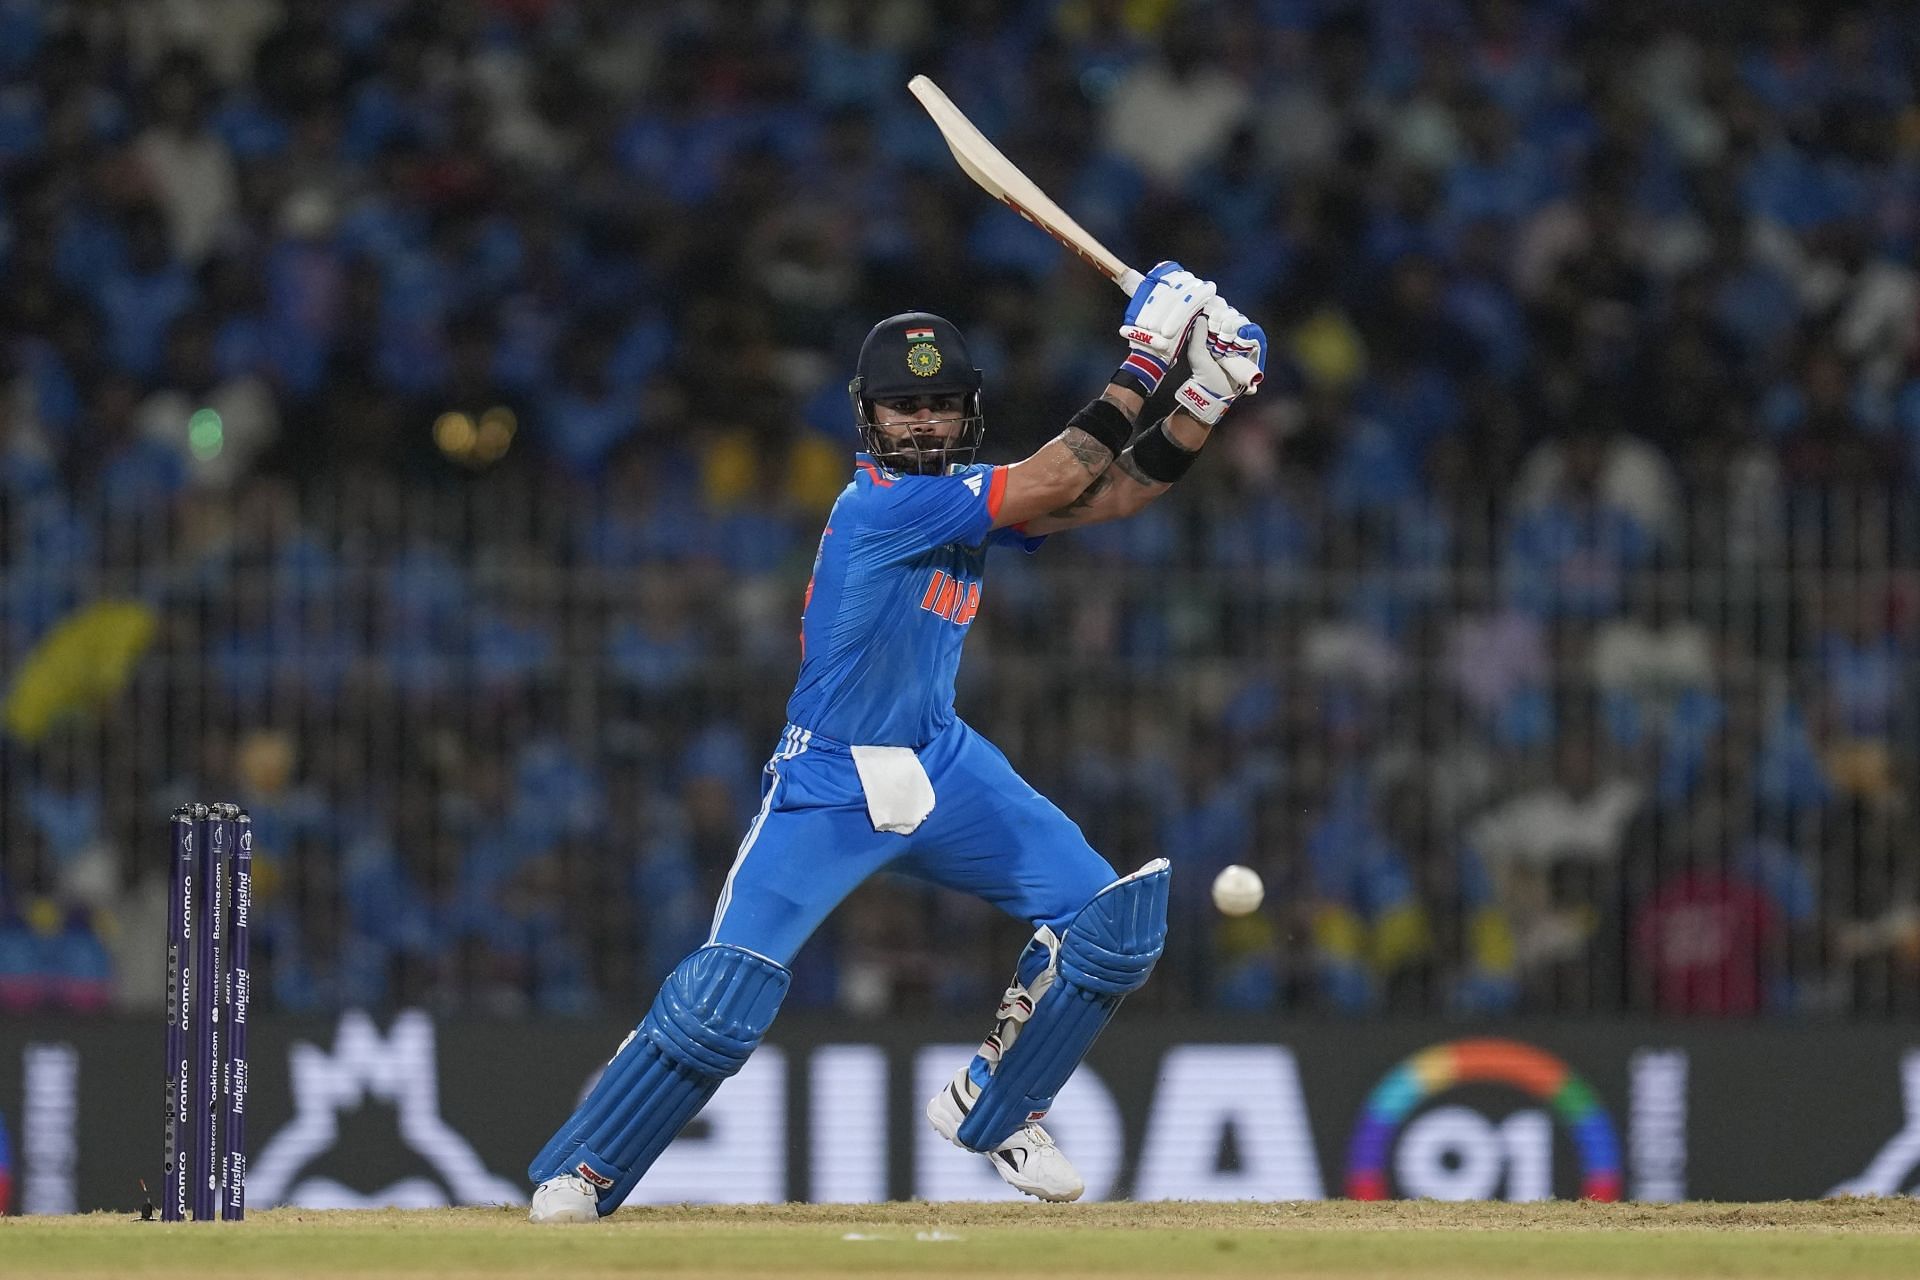 Virat Kohli and the big stage are a match made in heaven